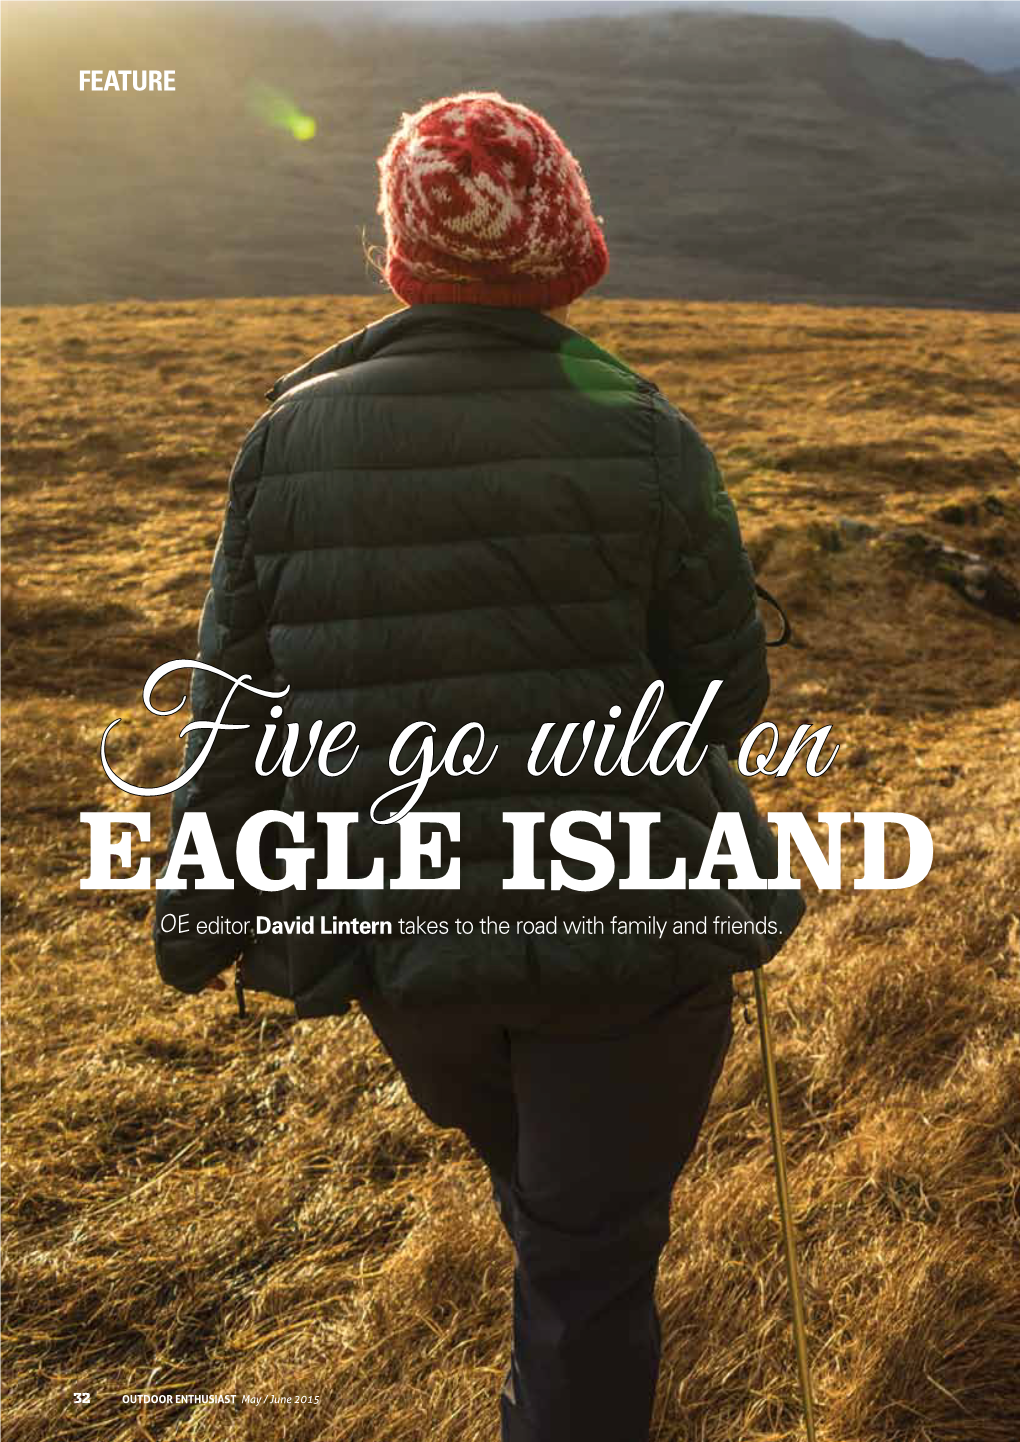 EAGLE ISLAND OE Editor David Lintern Takes to the Road with Family and Friends